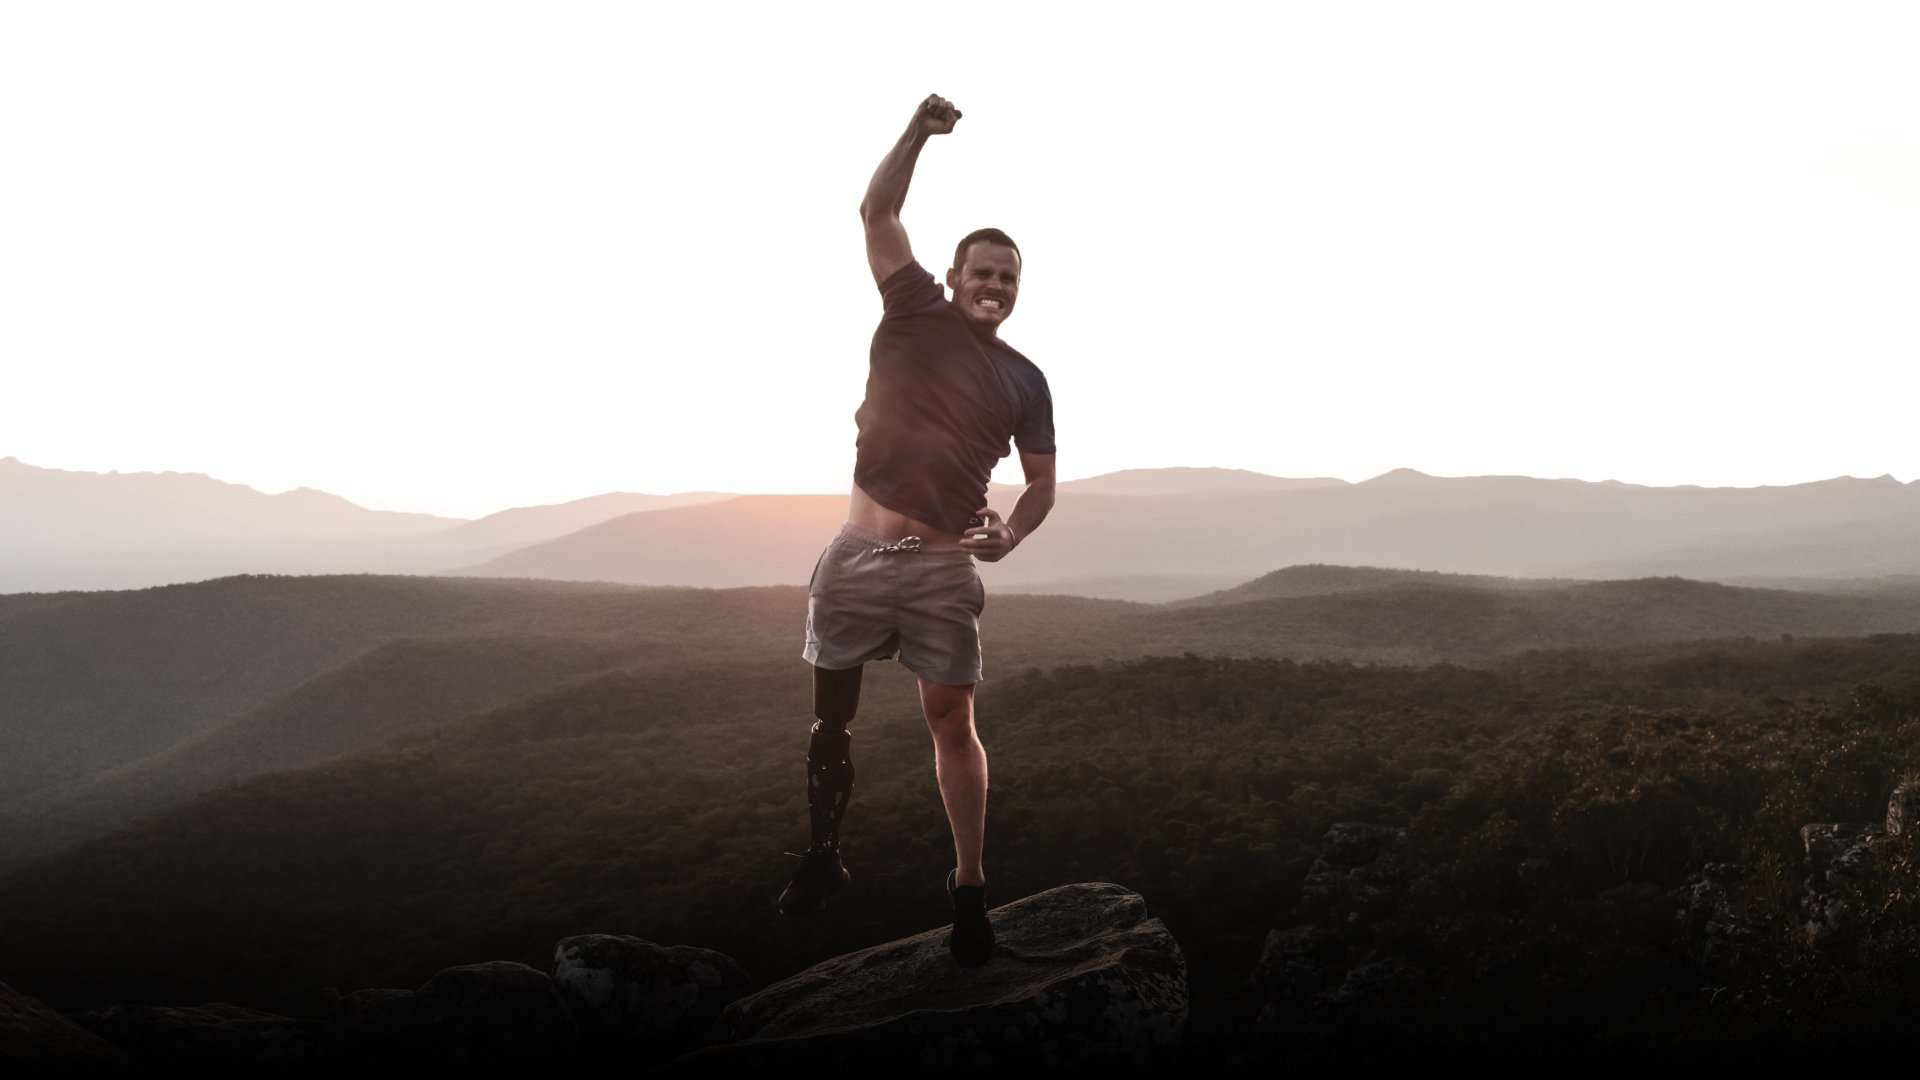 A tall, fit man with a bionic leg punches the air on a mountain at dusk.